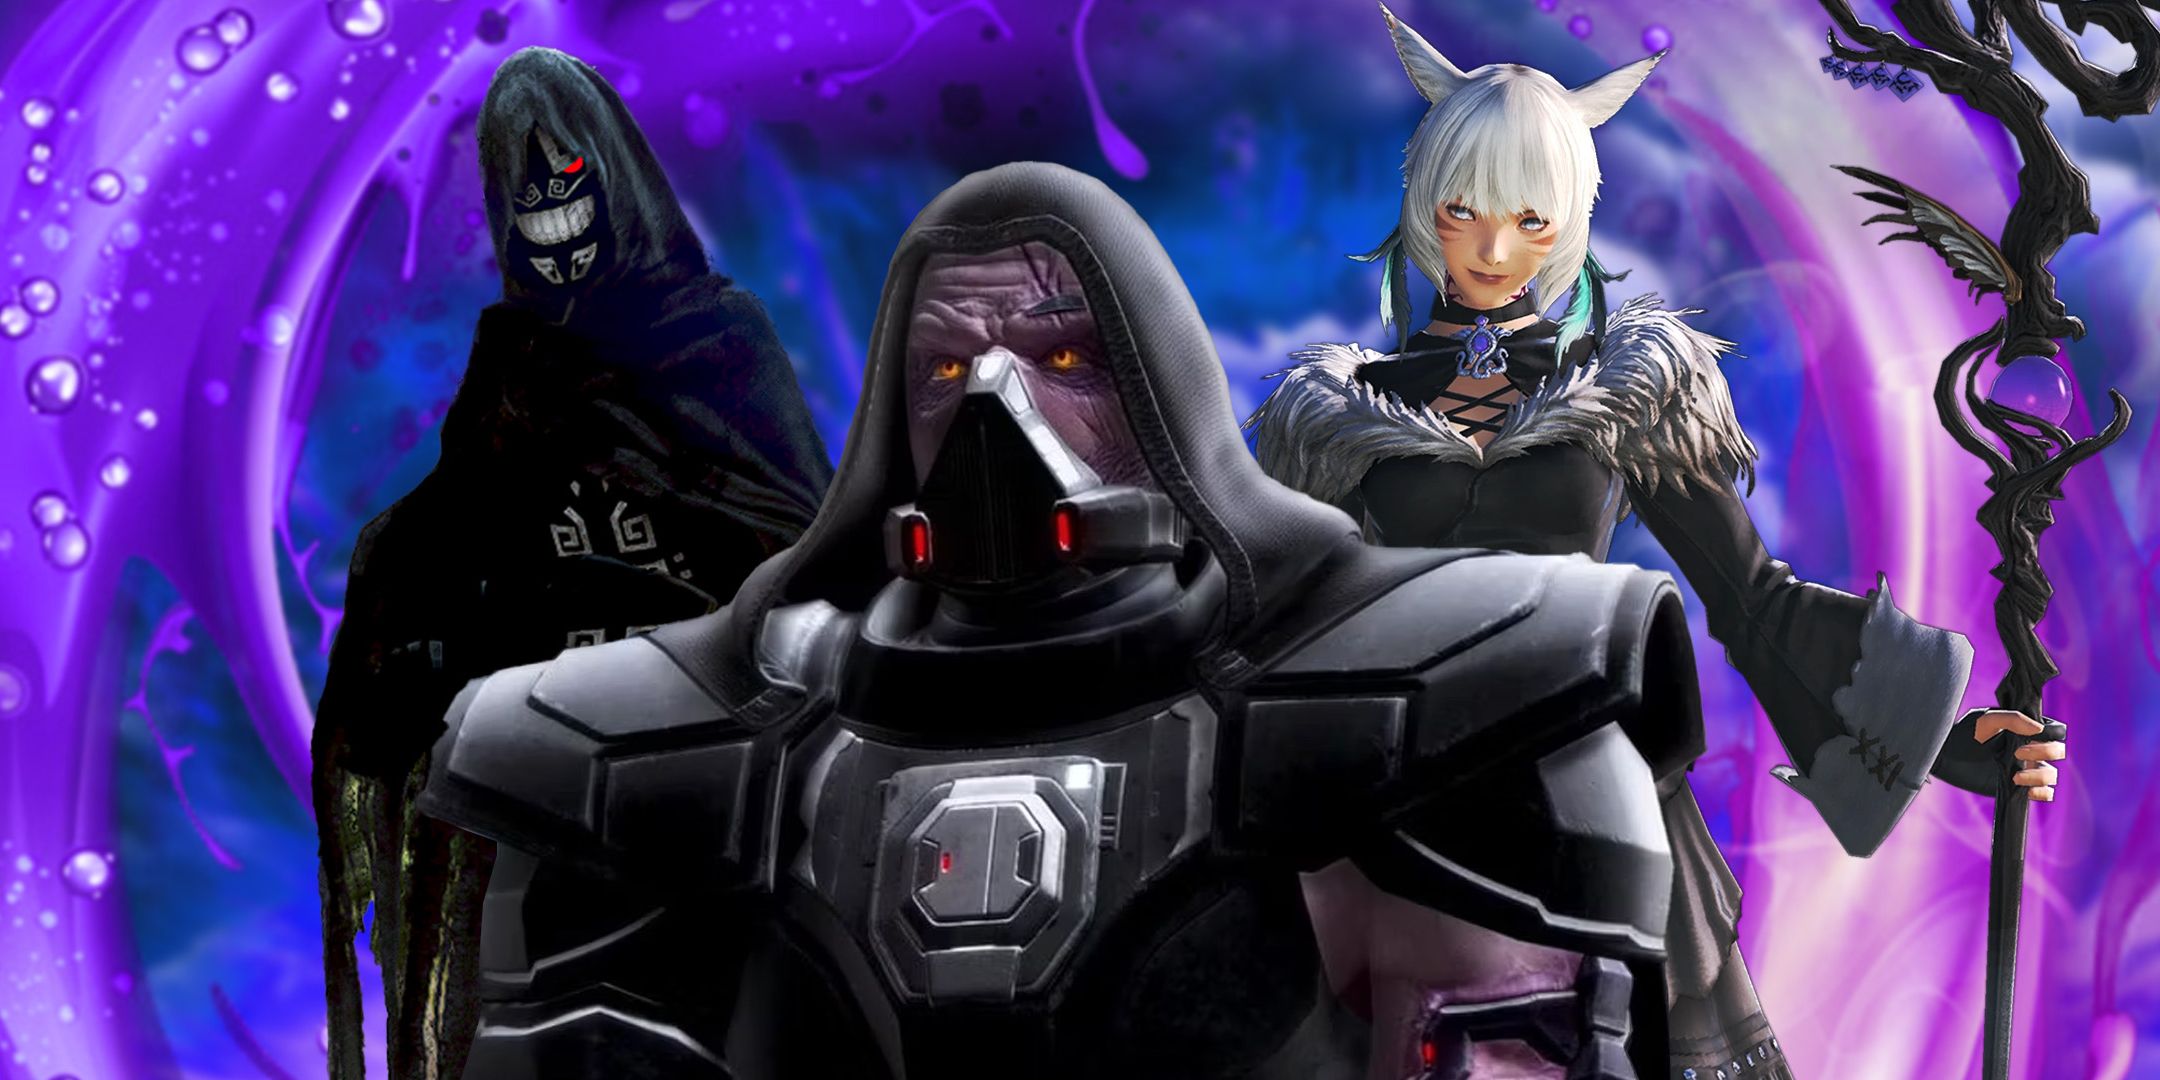 Darth Malgus from SWTOR, Y'Shtola from FF14 and  Black Spirit from BDO.